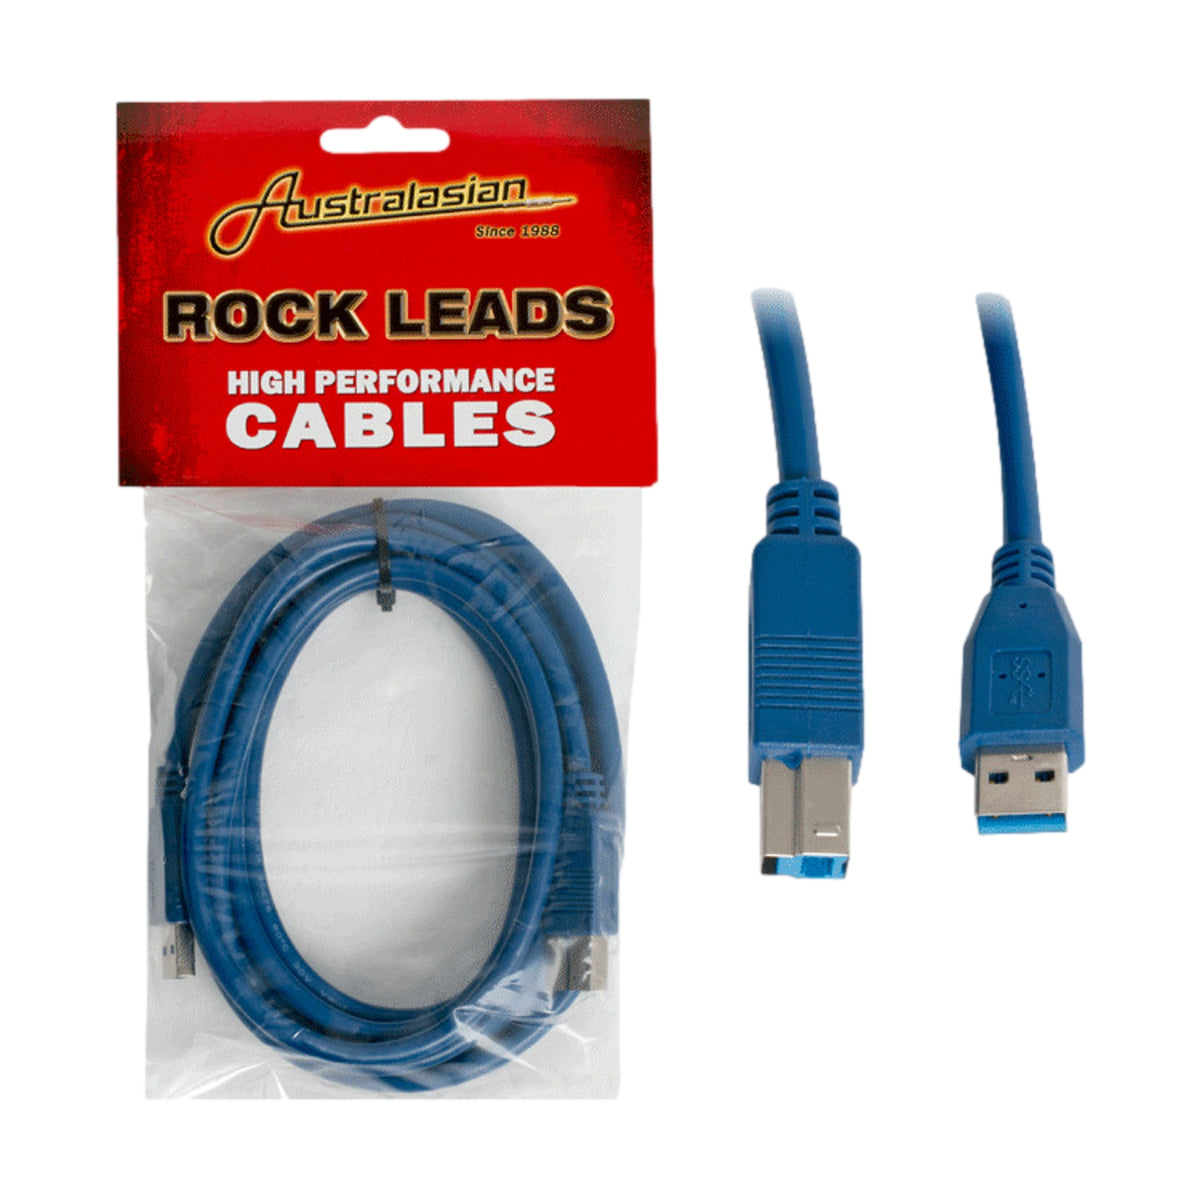 Australasian USB 3.0 Type A to USB Type B 10ft Cable